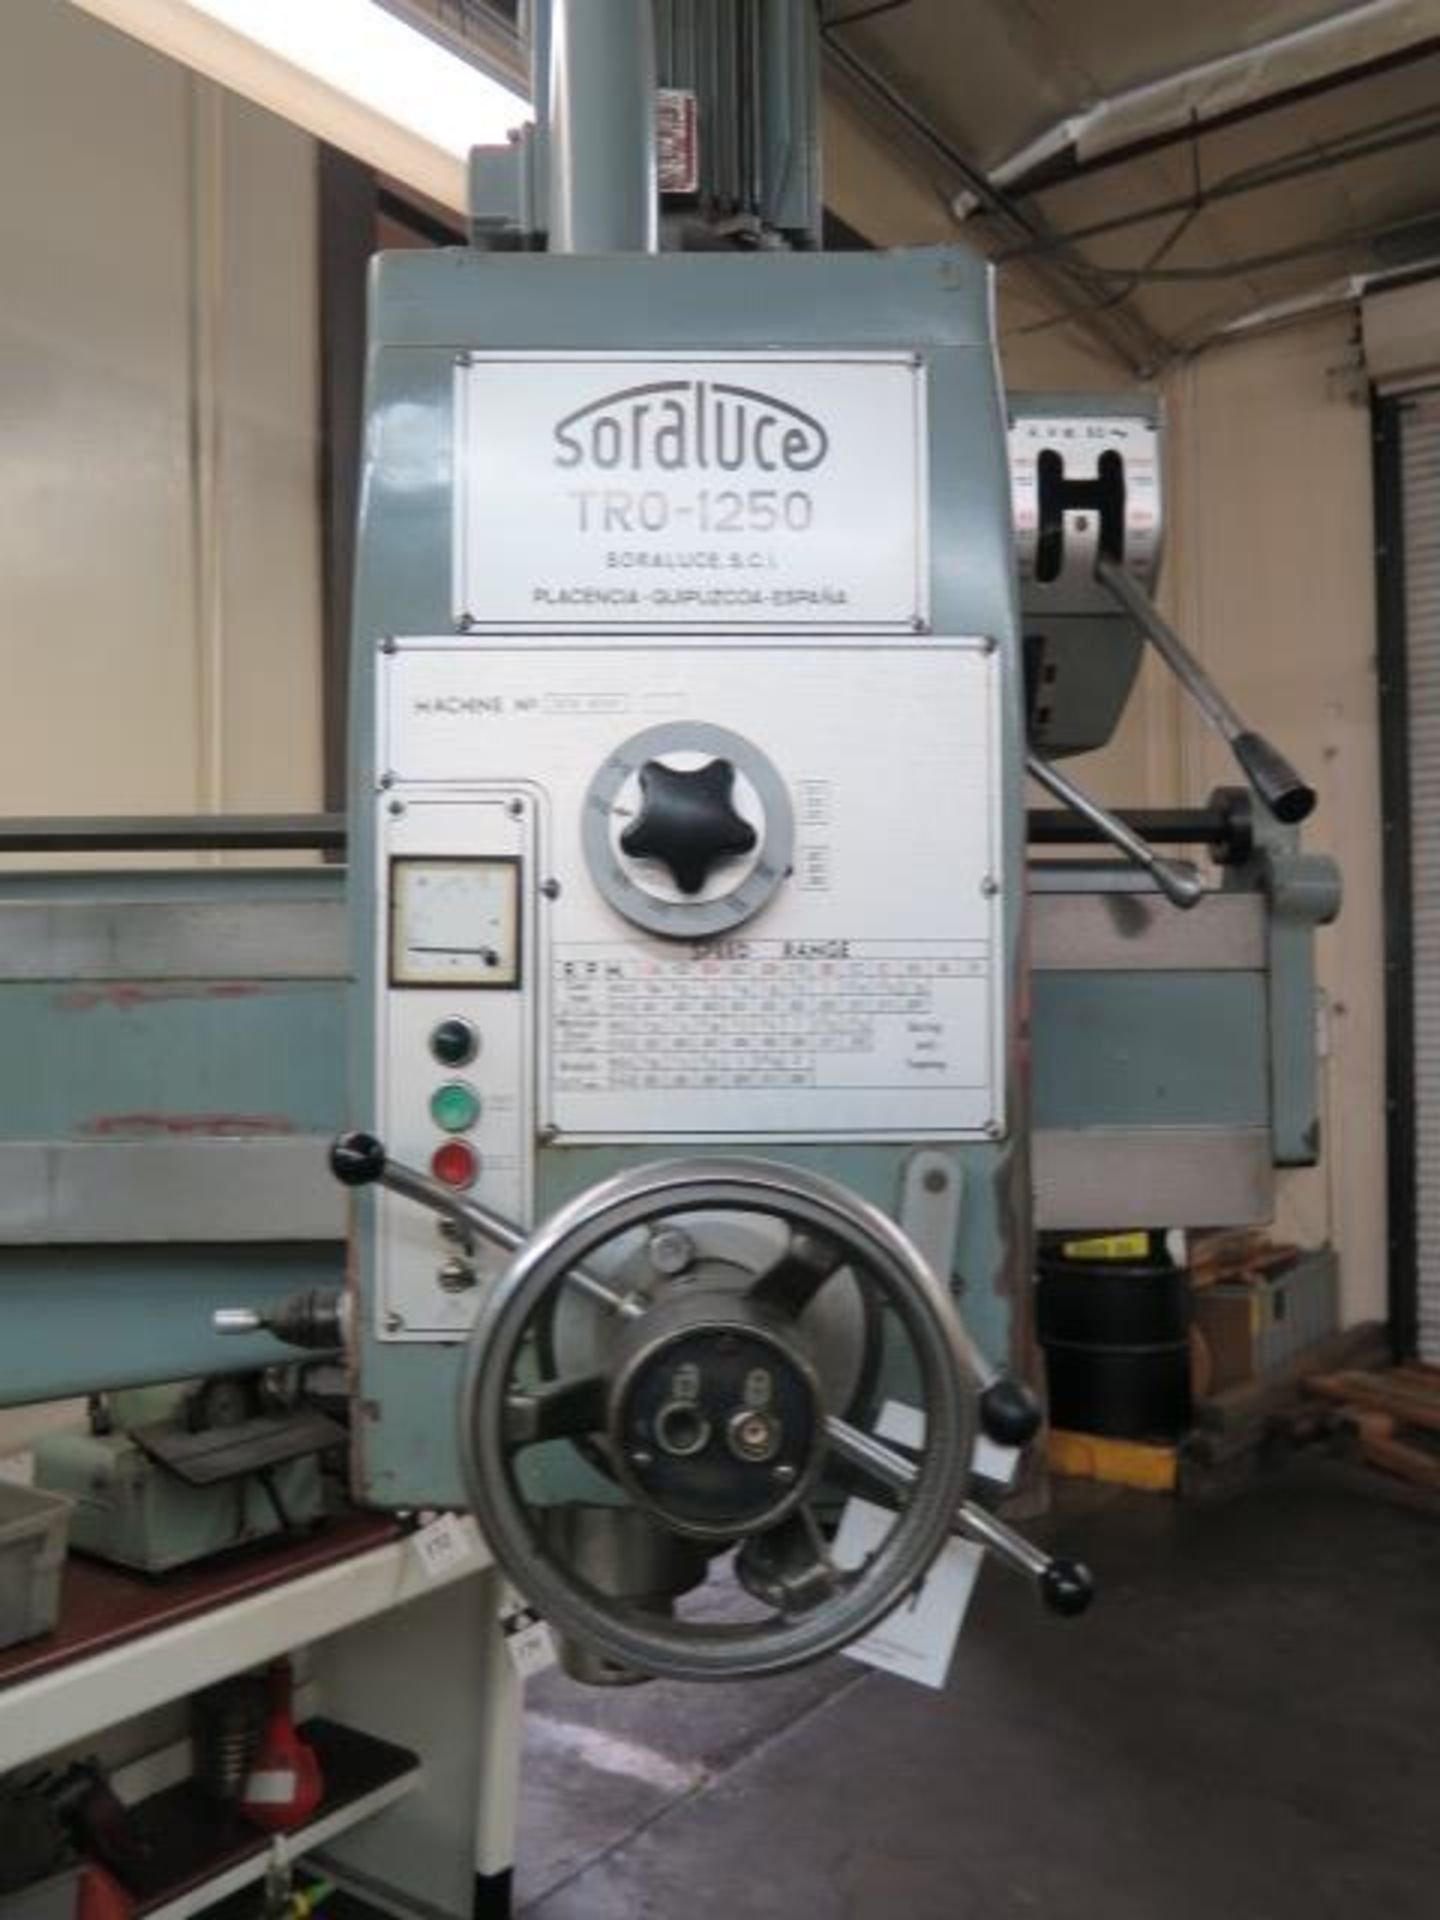 Soraluce TR0-1250 11” Column x 36” Radial Arm Drill s/n 3208-10208 w/ 29-1700 RPM, SOLD AS IS - Image 8 of 10